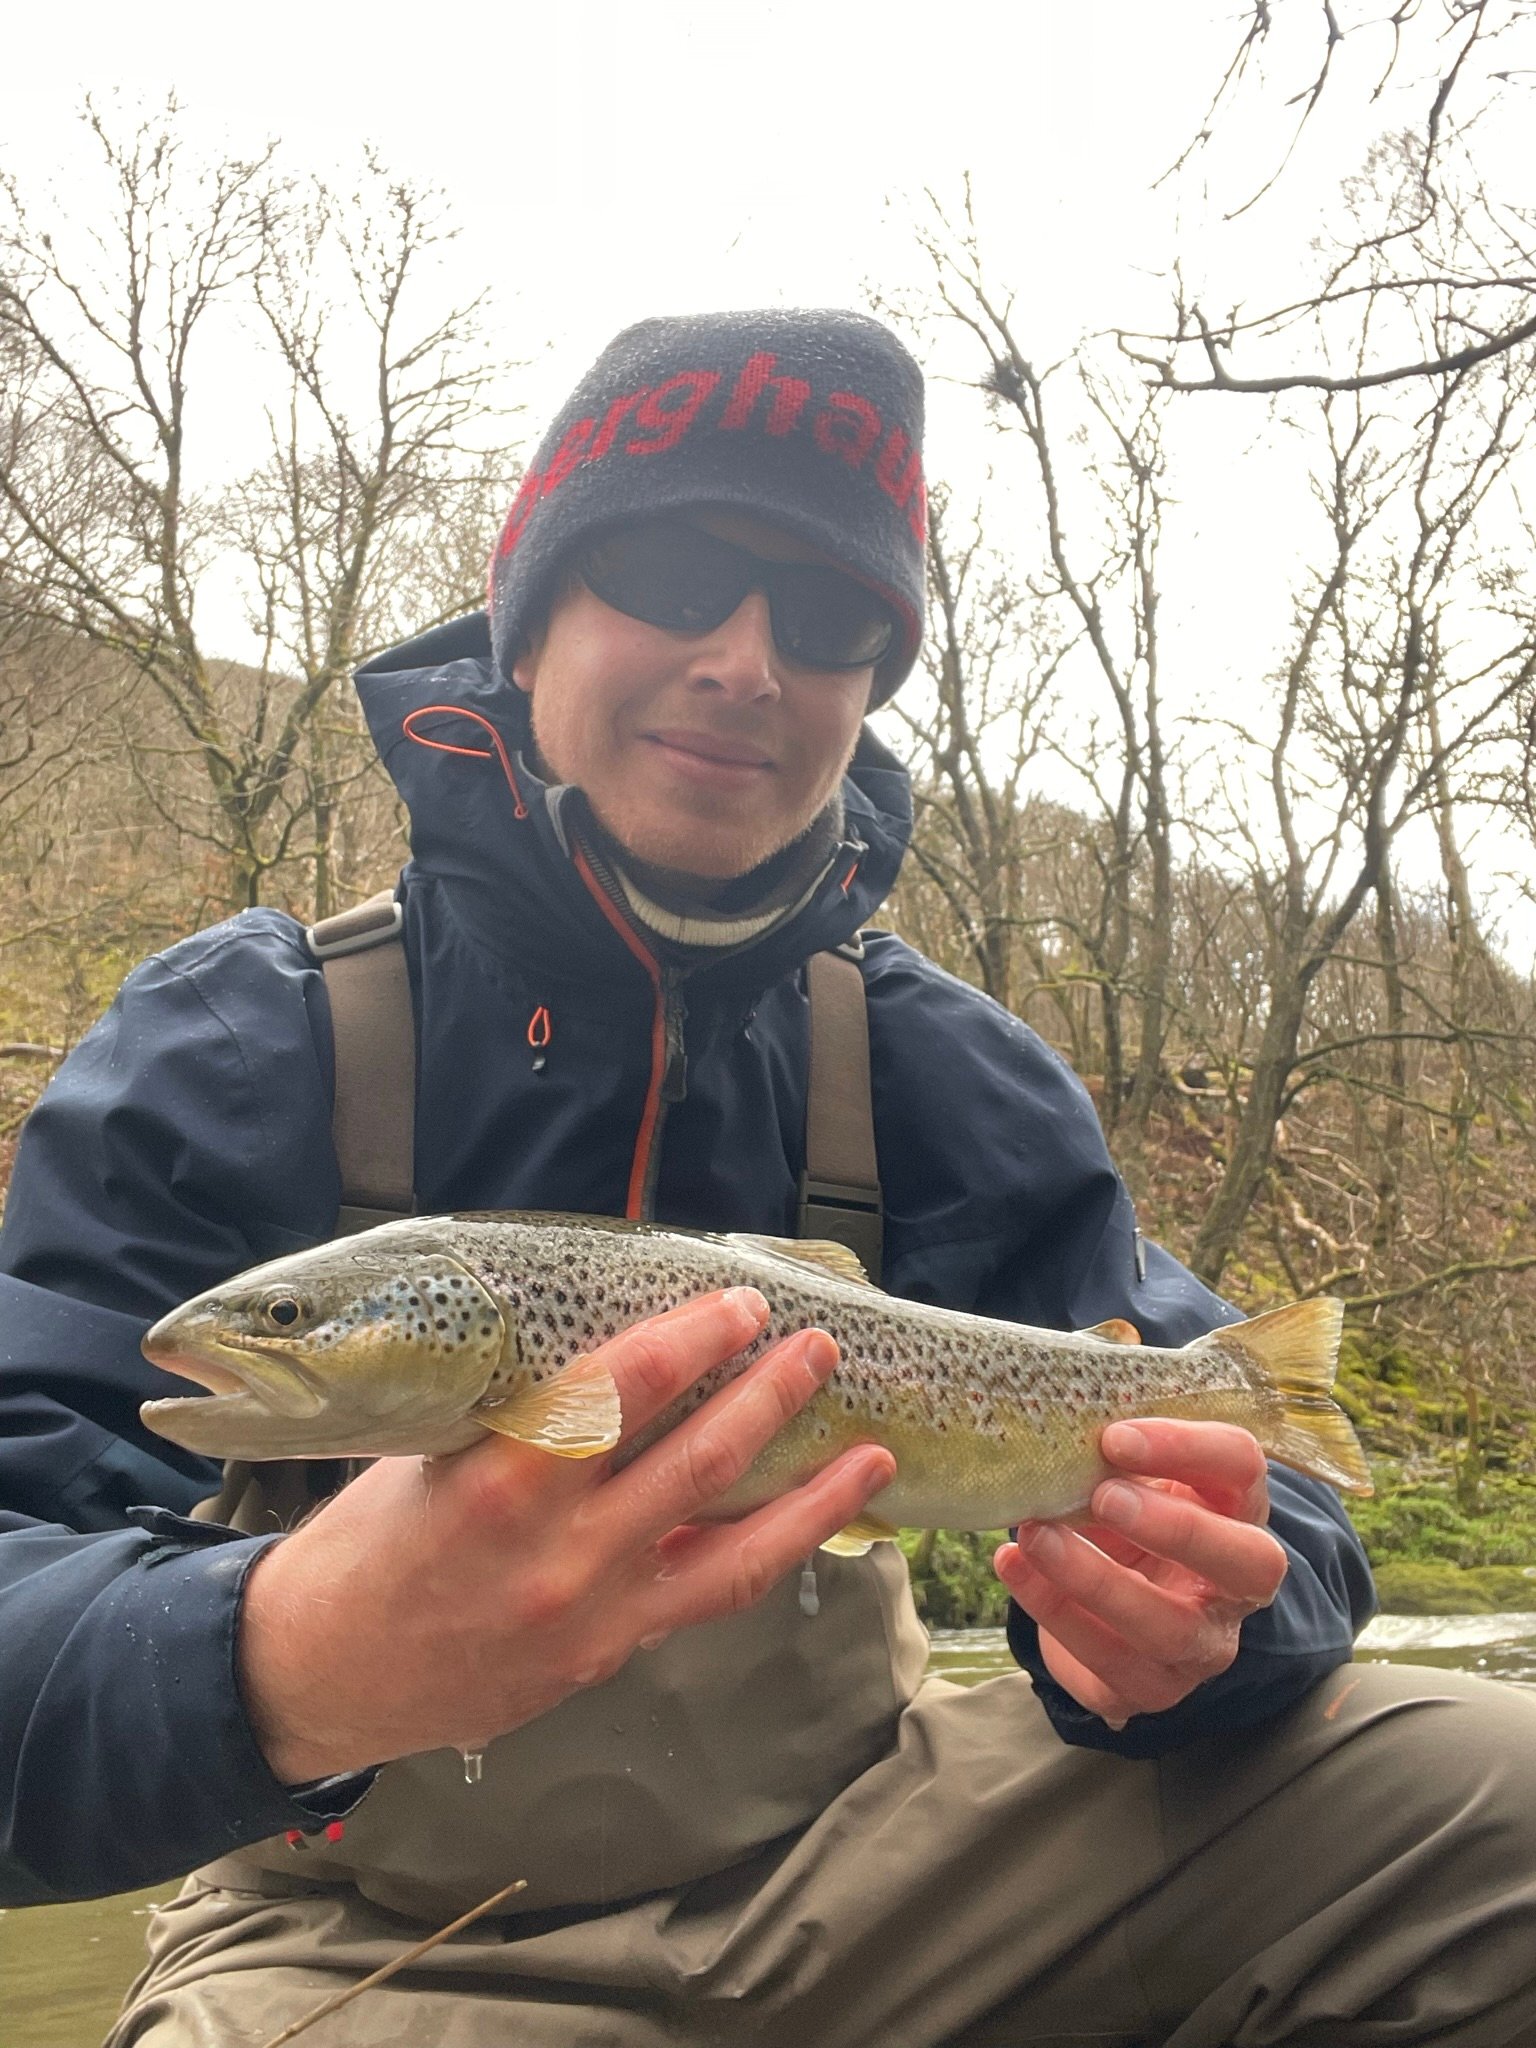 James holding a large brown trout caught from the upper river wye